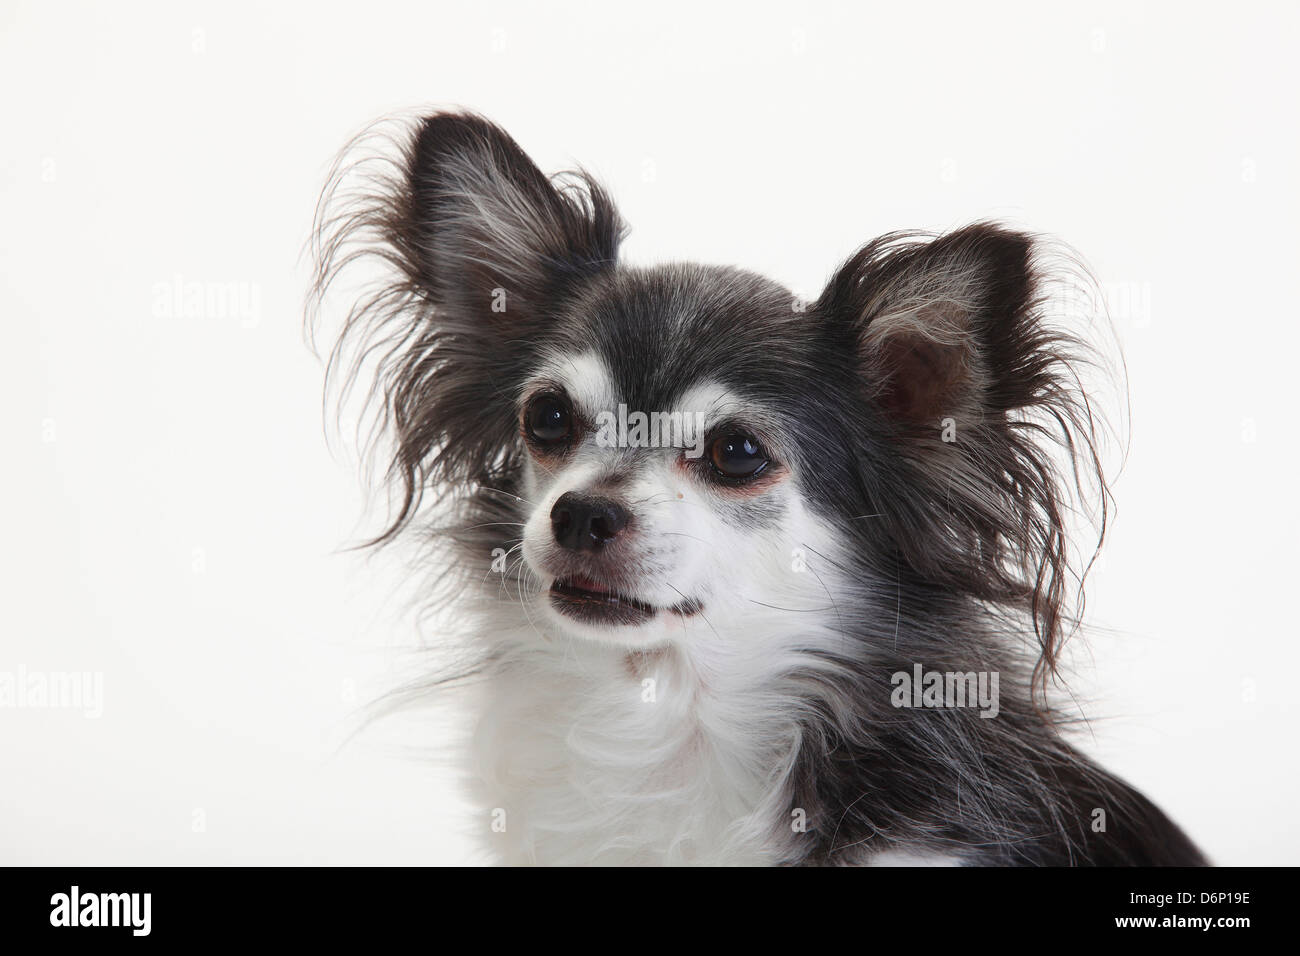 Chihuahua, longhaired, black with white, 10 years old |Chihuahua,  langhaarig, schwarz mit weiss, 10 Jahre alt / alter Hund Stock Photo - Alamy